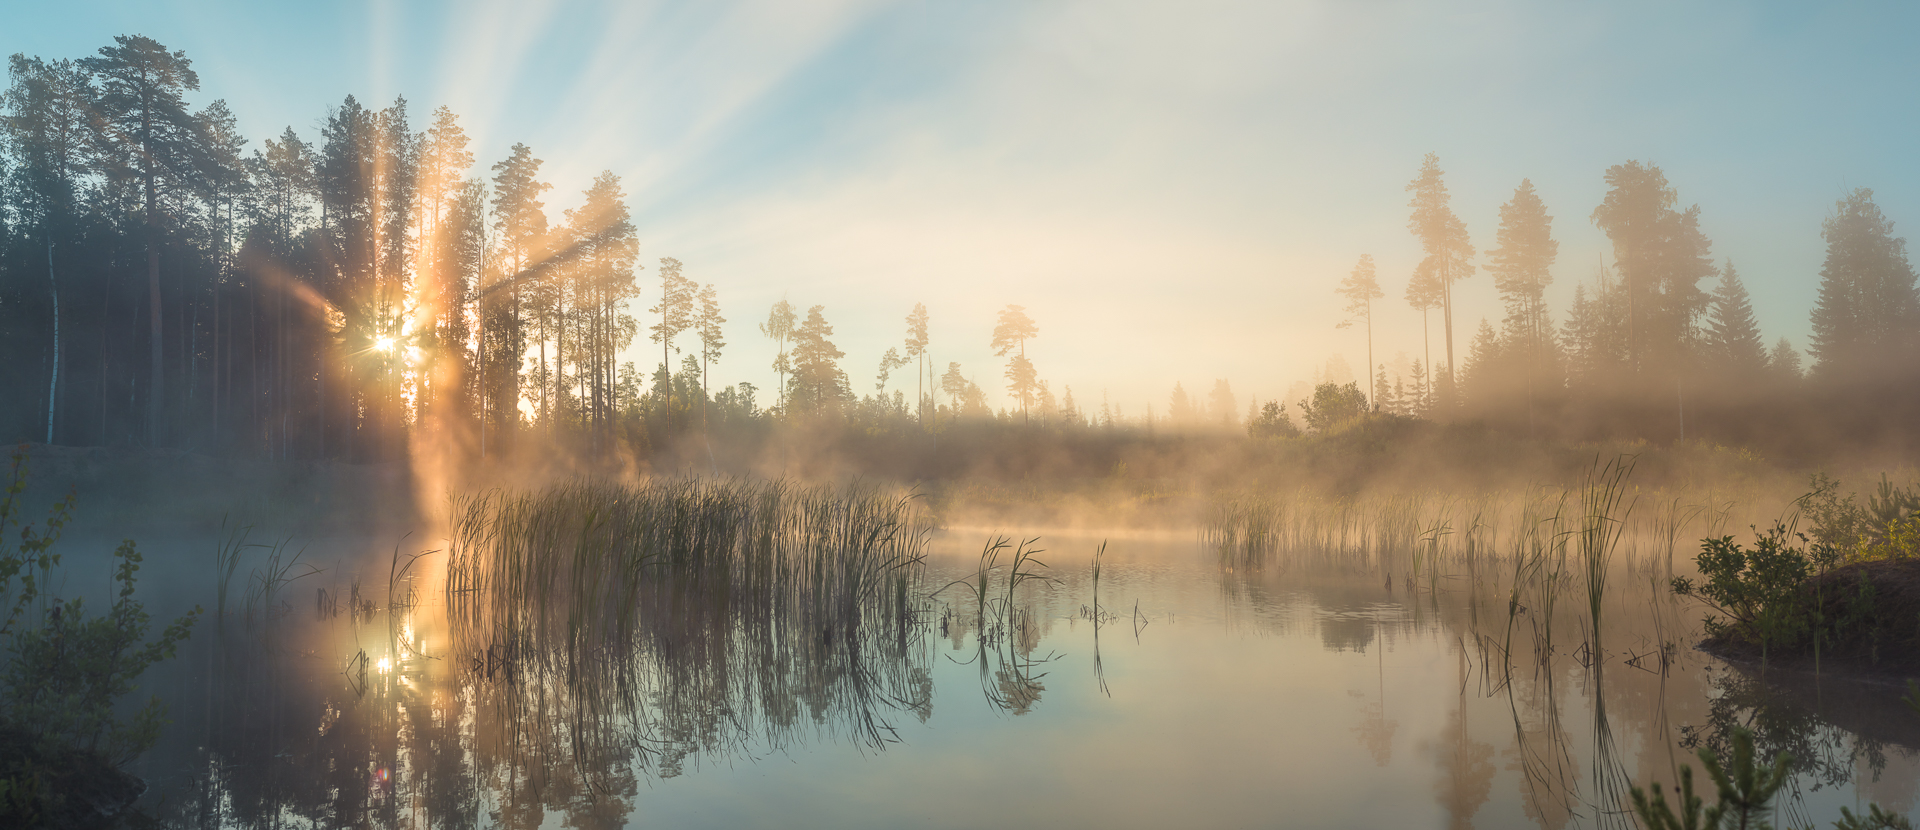 General 1920x830 sunset water forest mist nature landscape sunlight calm waters plants outdoors